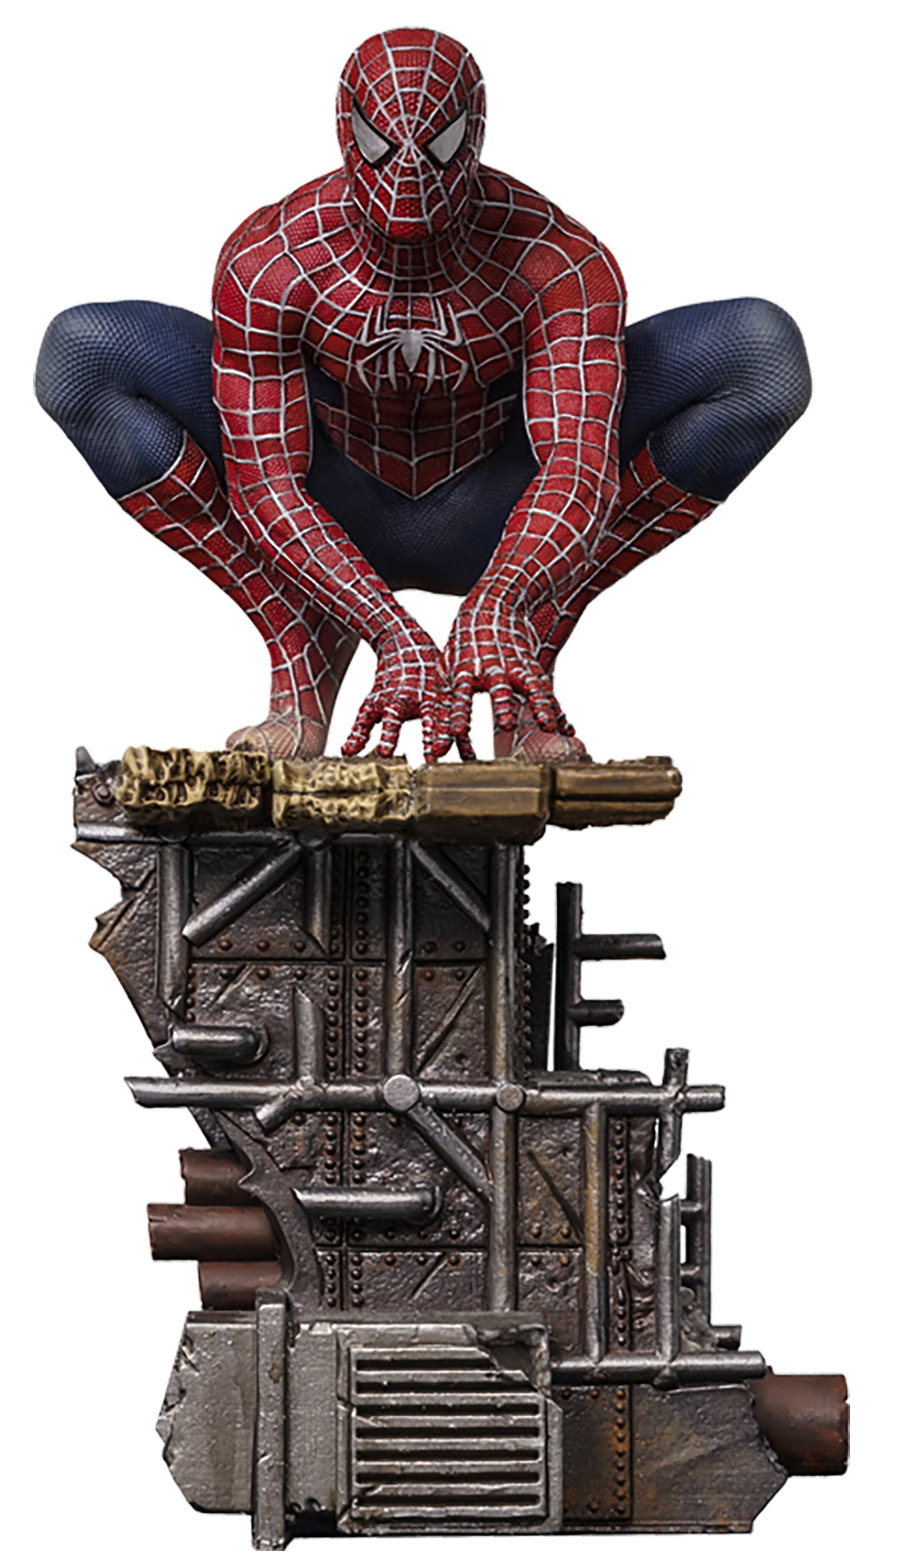 Spider-Man Peter #2 1/10 Scale Statue